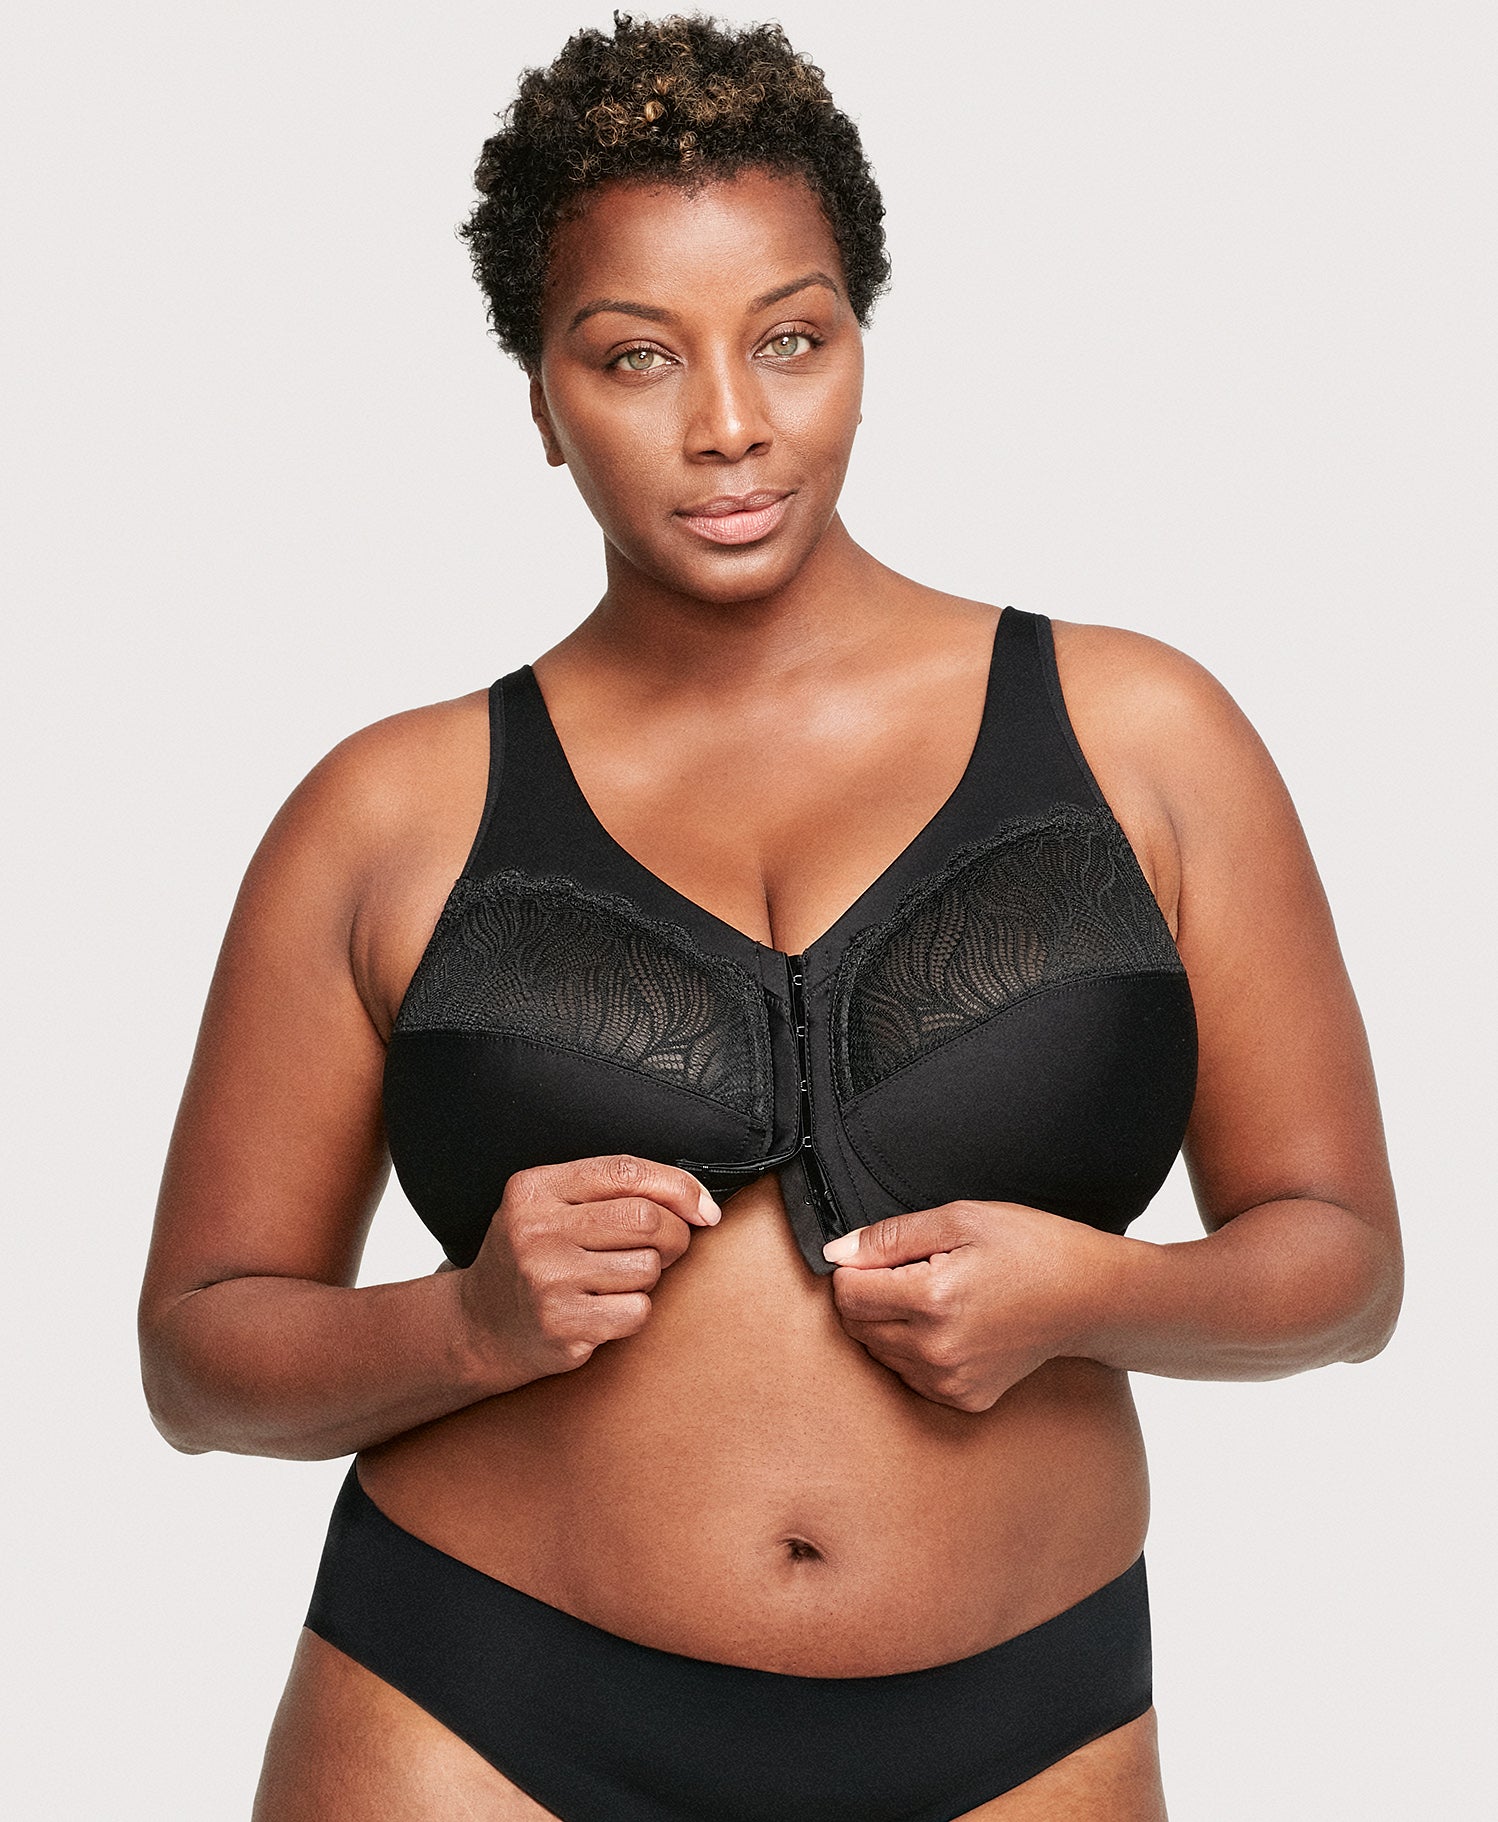 Just My Size Comfort Shaping Wirefree Bra - 1Q20